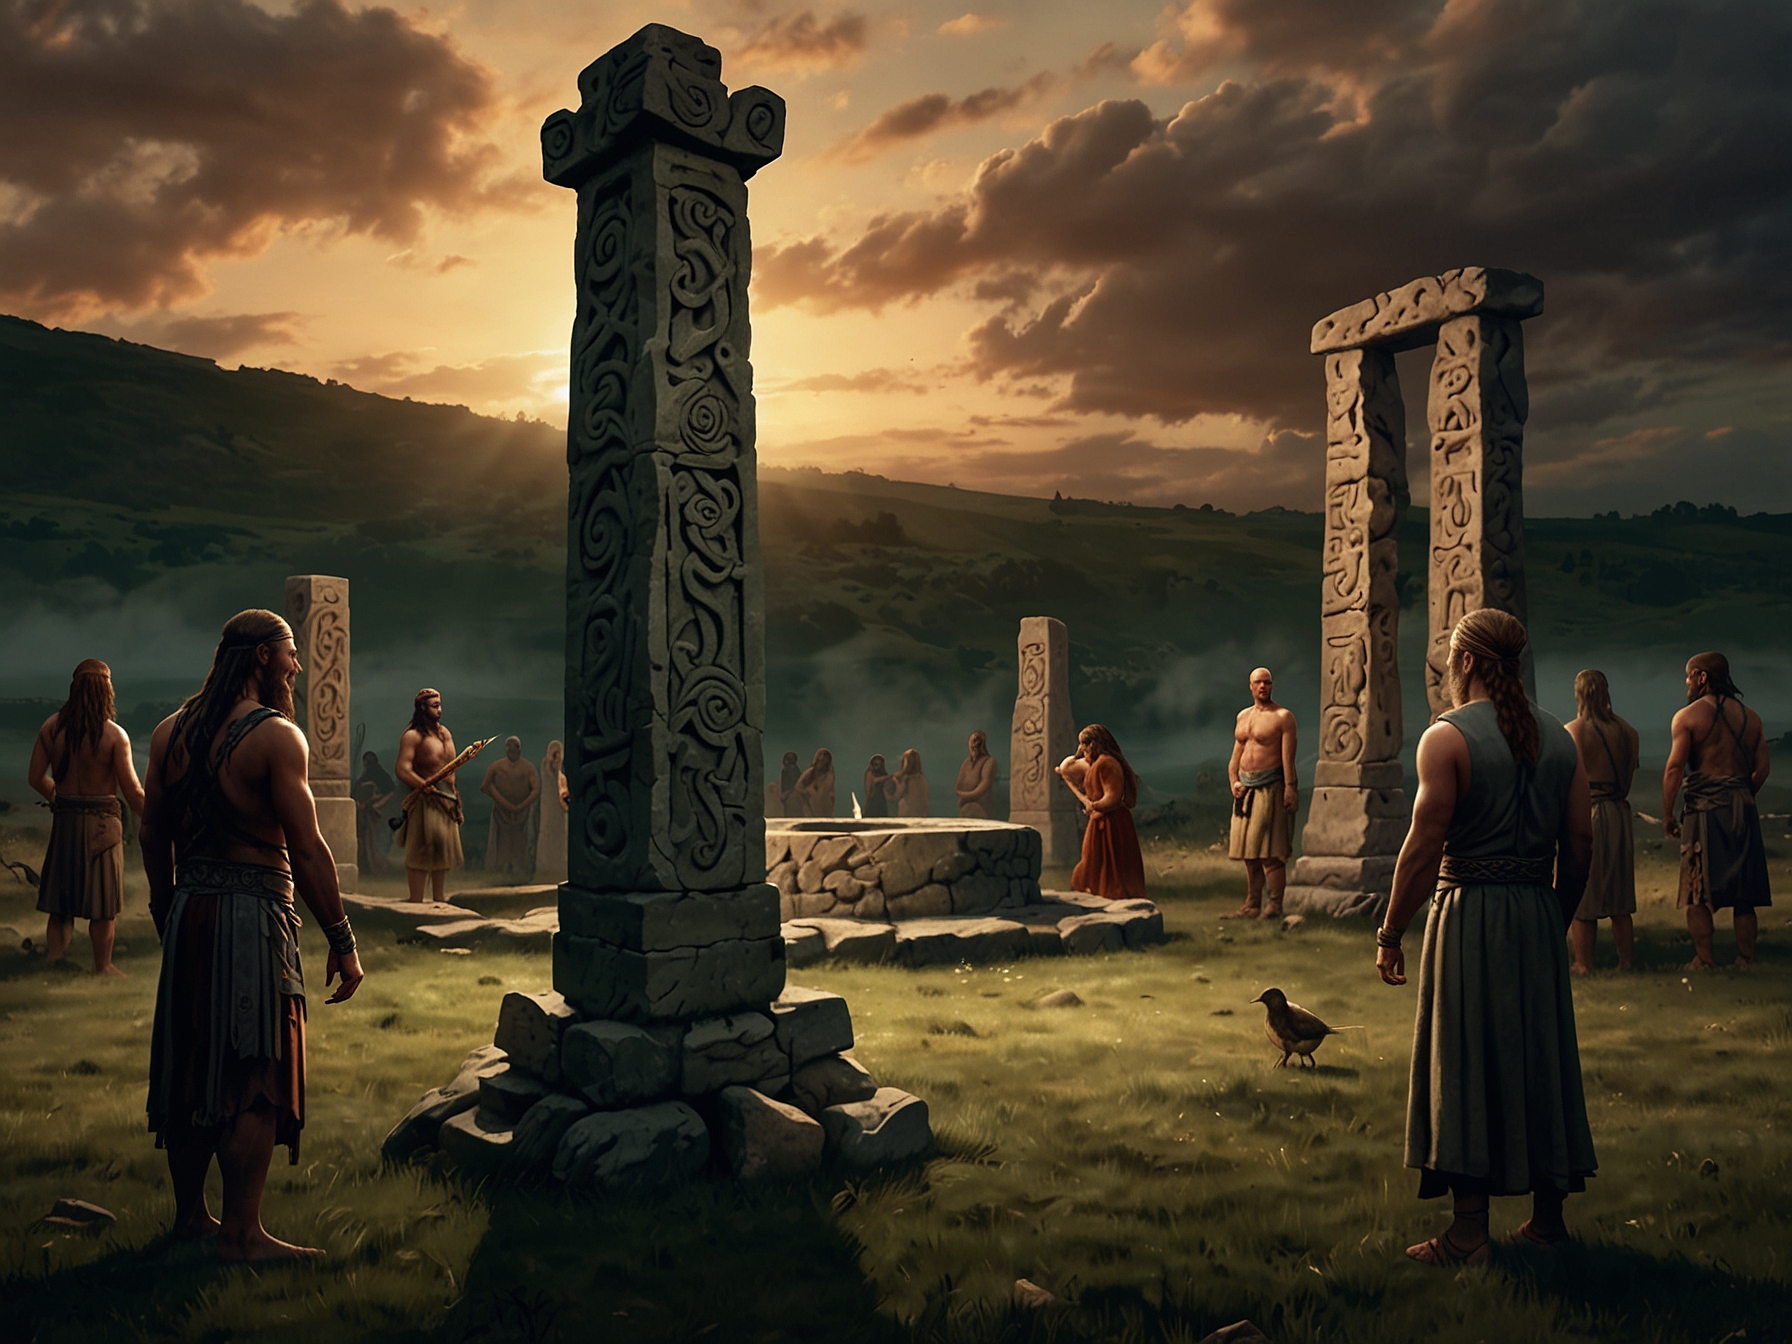 A depiction of Celtic rituals, showing the possibility of human sacrifice near a ceremonial site, with people gathered around in ancient attire performing the rites.